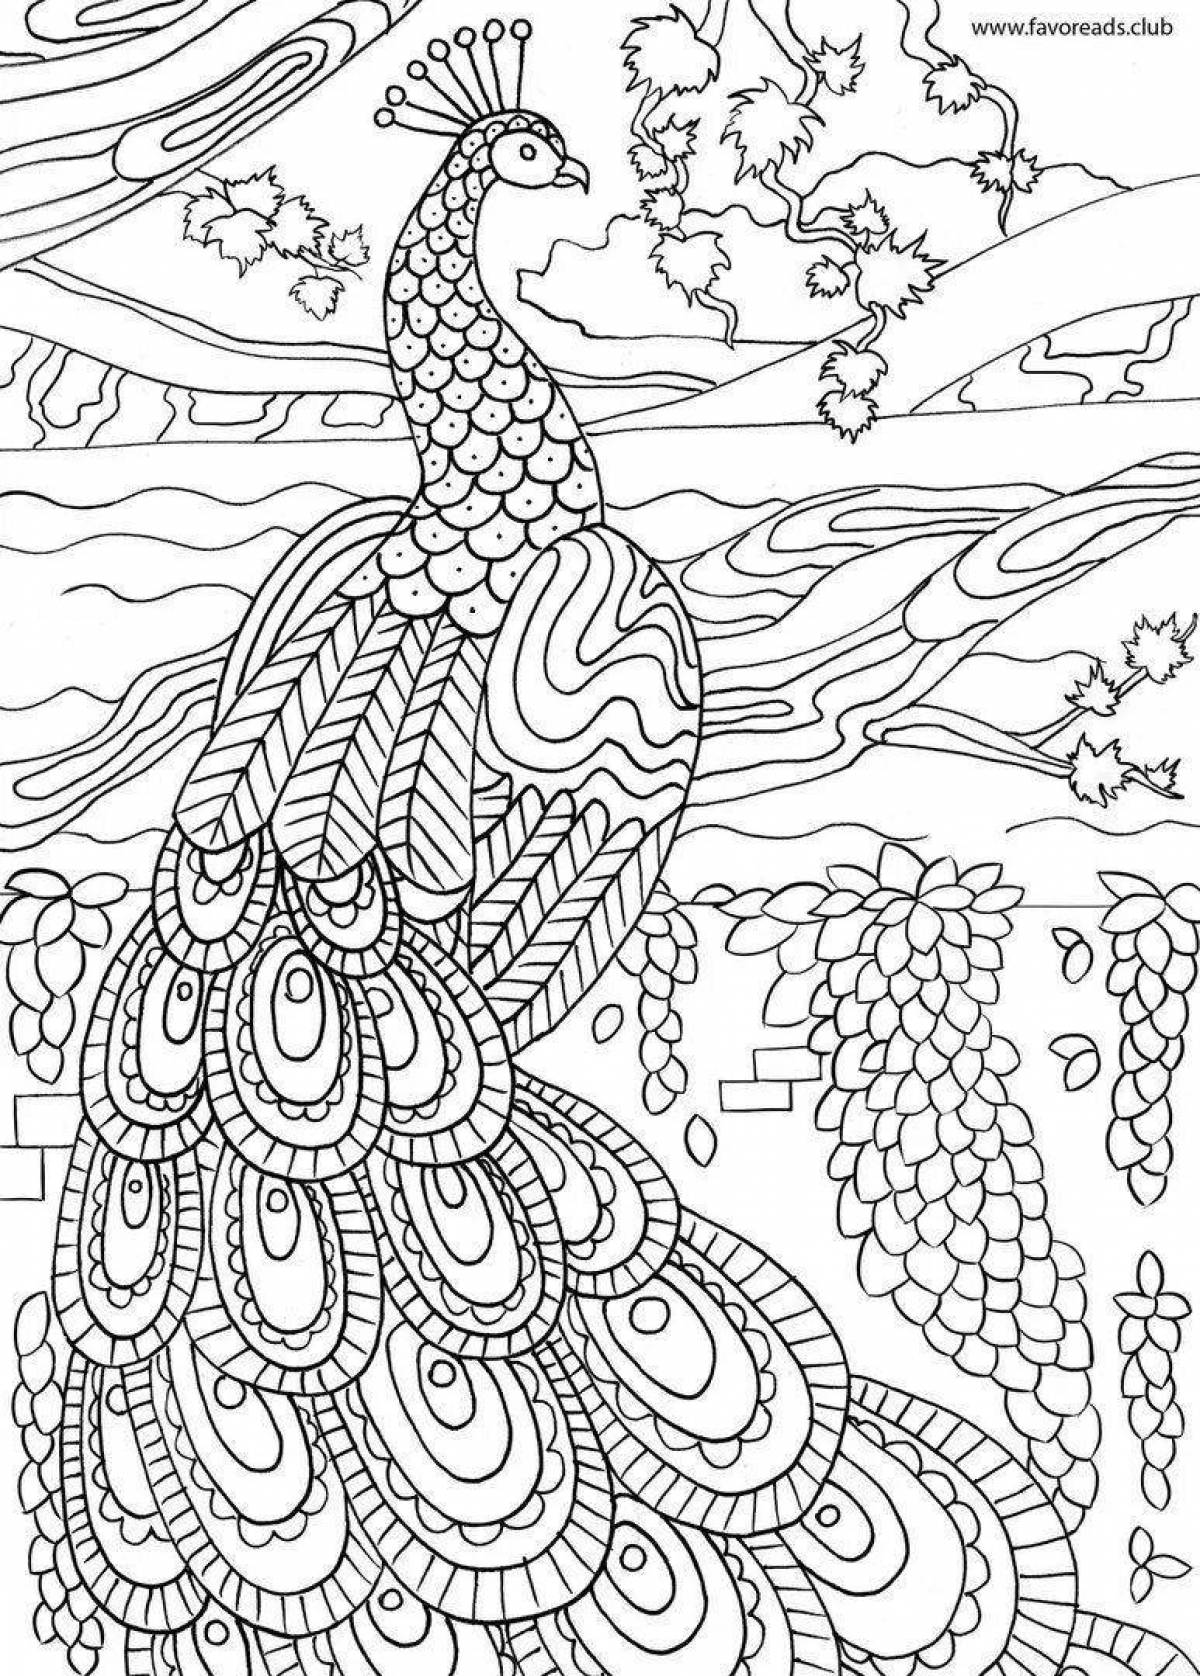 Fun coloring art therapy for adults